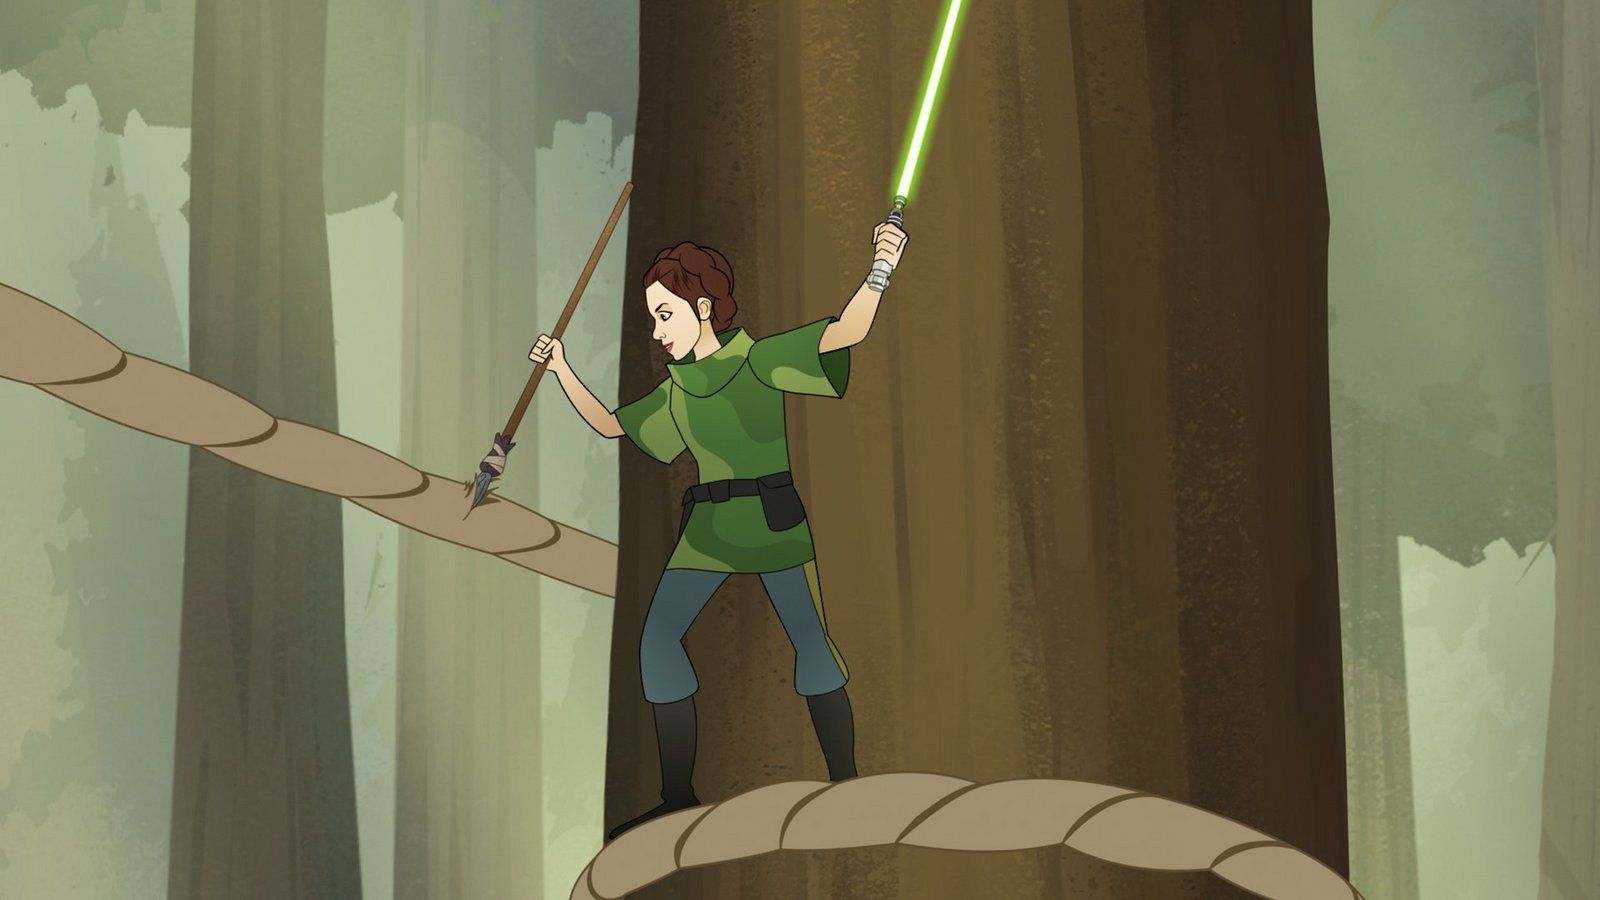 Star Wars: Forces of Destiny Returns With New Episodes Tomorrow Followed by a TV Special May 25th on the Disney Channel Wars News Net